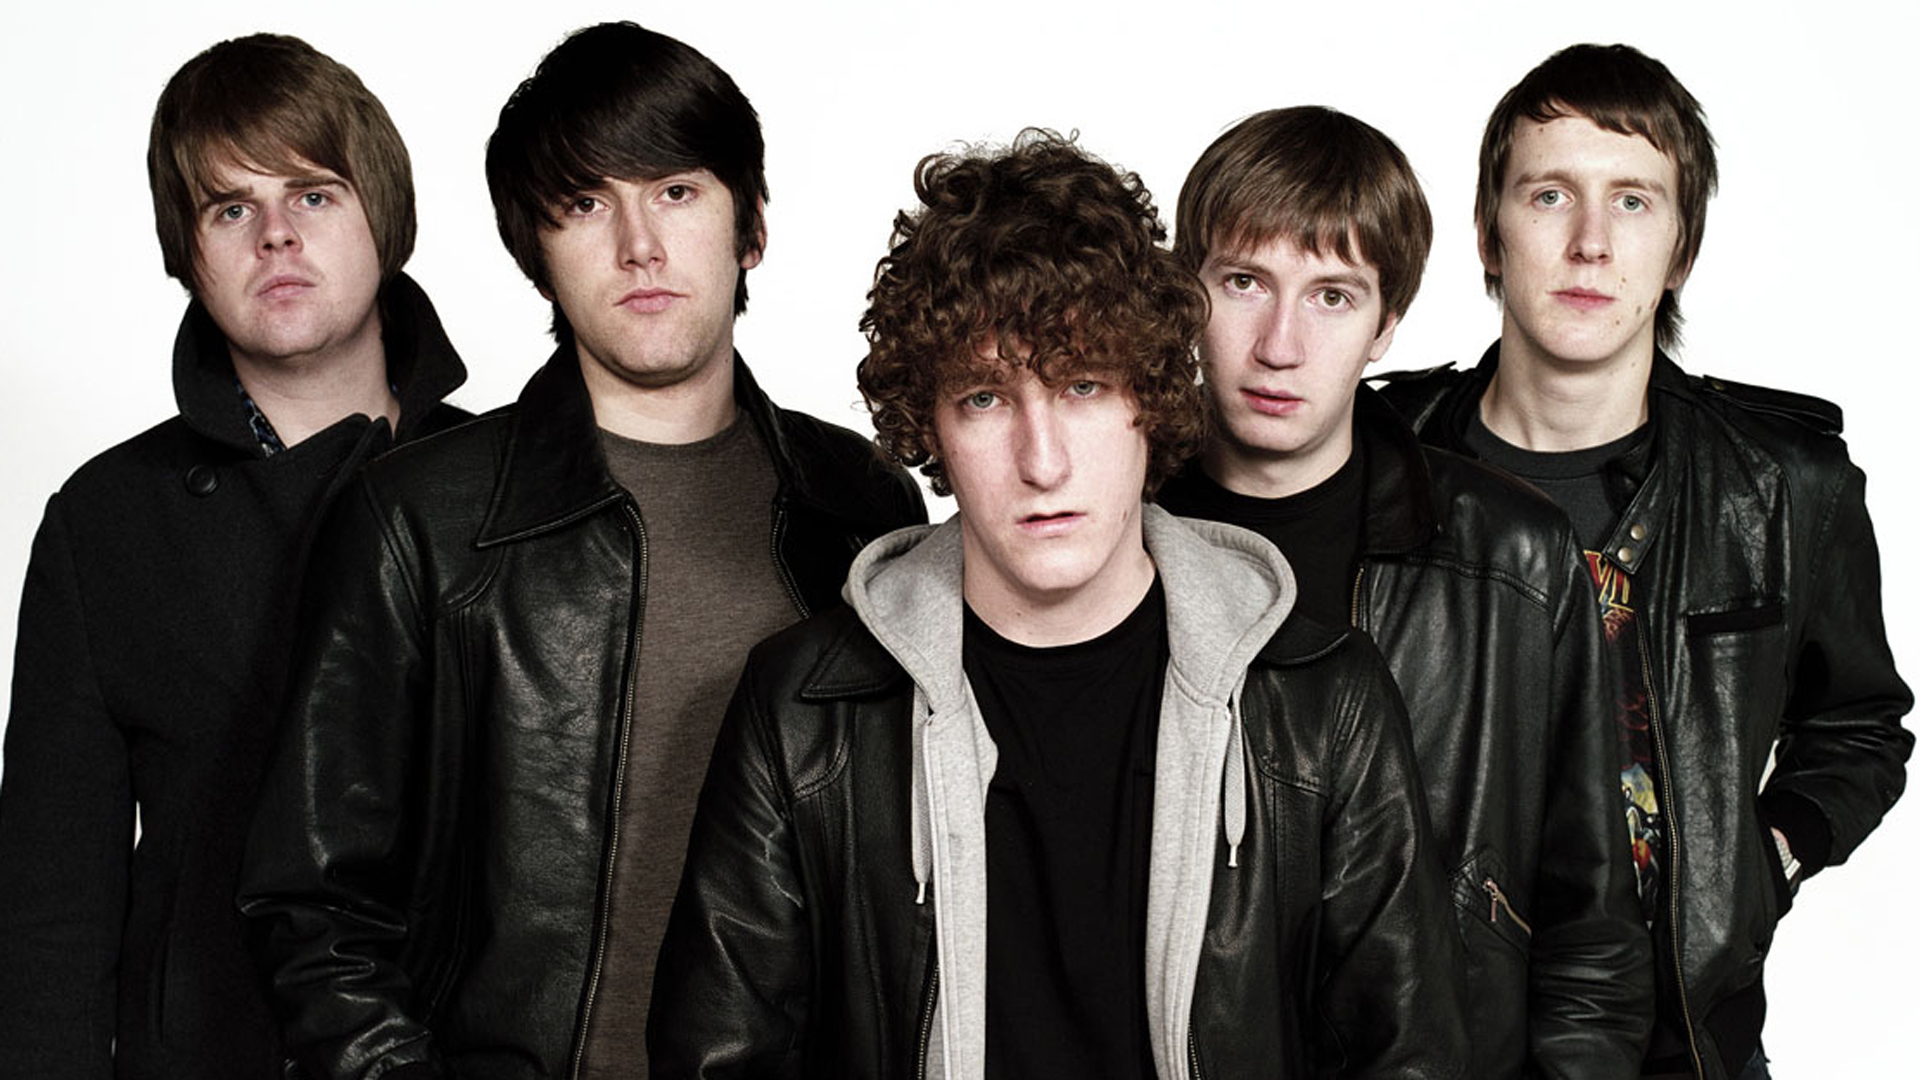 The Is An Emergency av The Pigeon Detectives